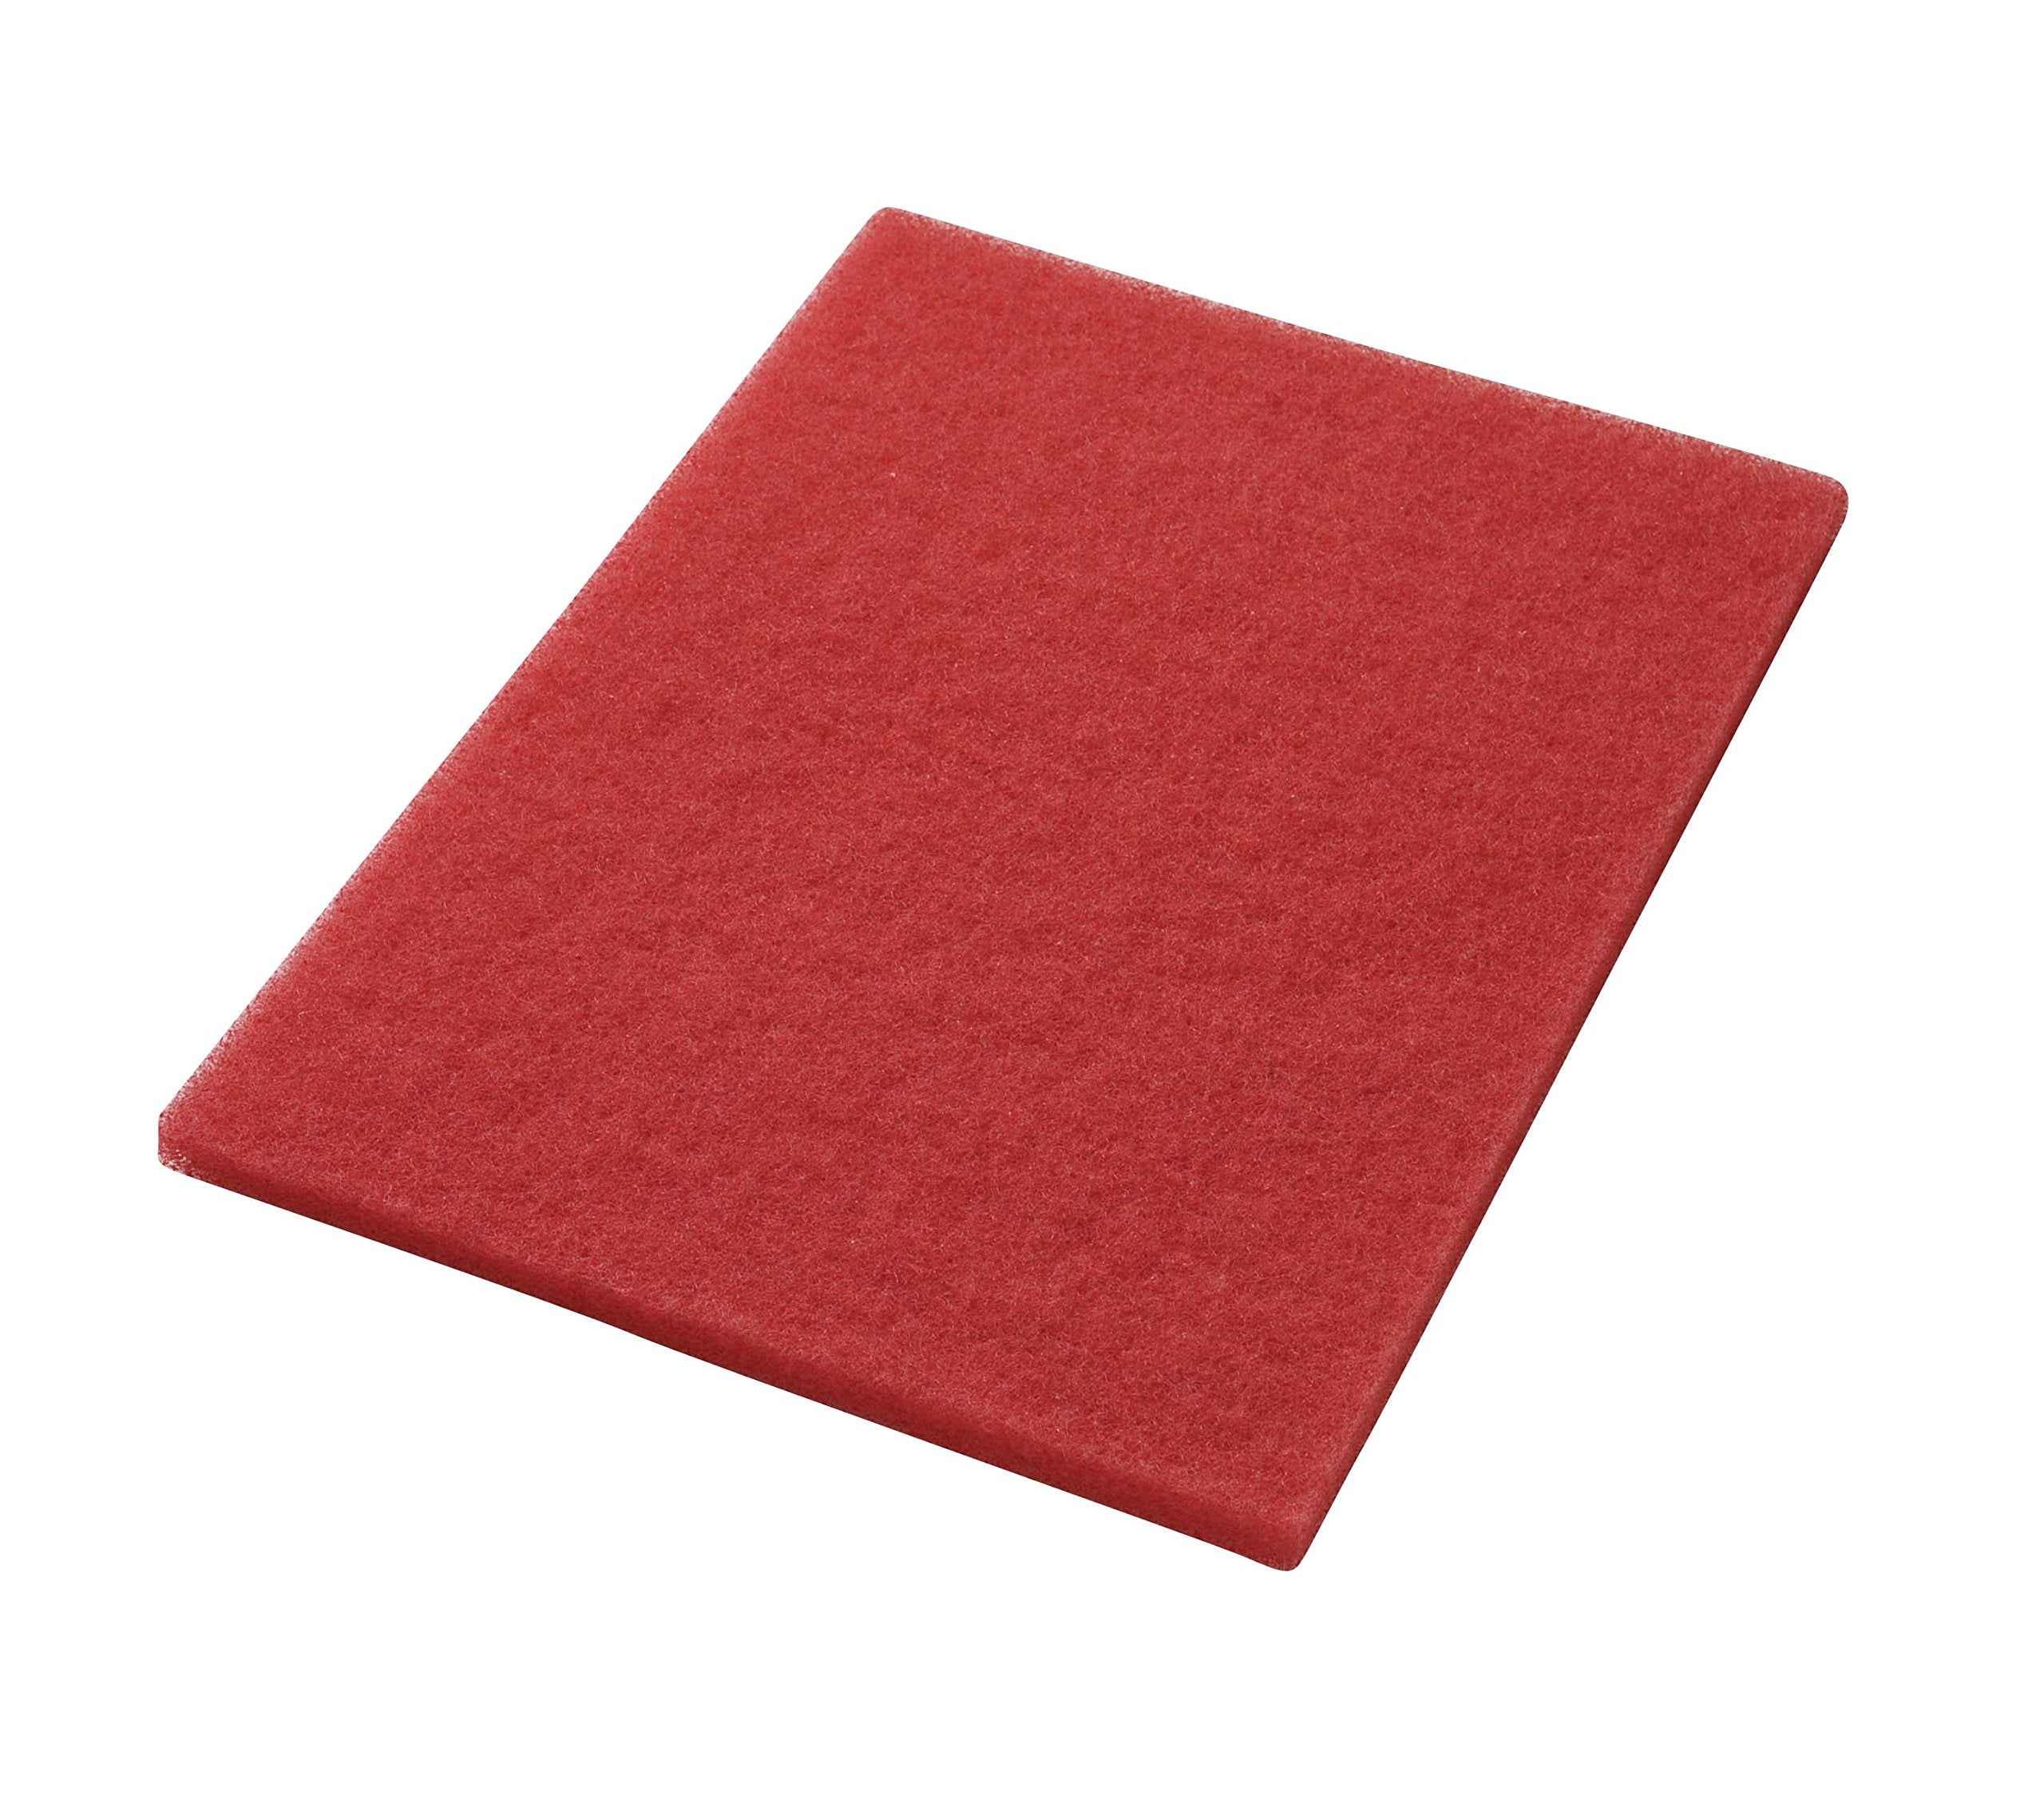 Americo Manufacturing 40441218 Red Buffing Floor Pad Rectangle (5 Pack), 12" x 18"